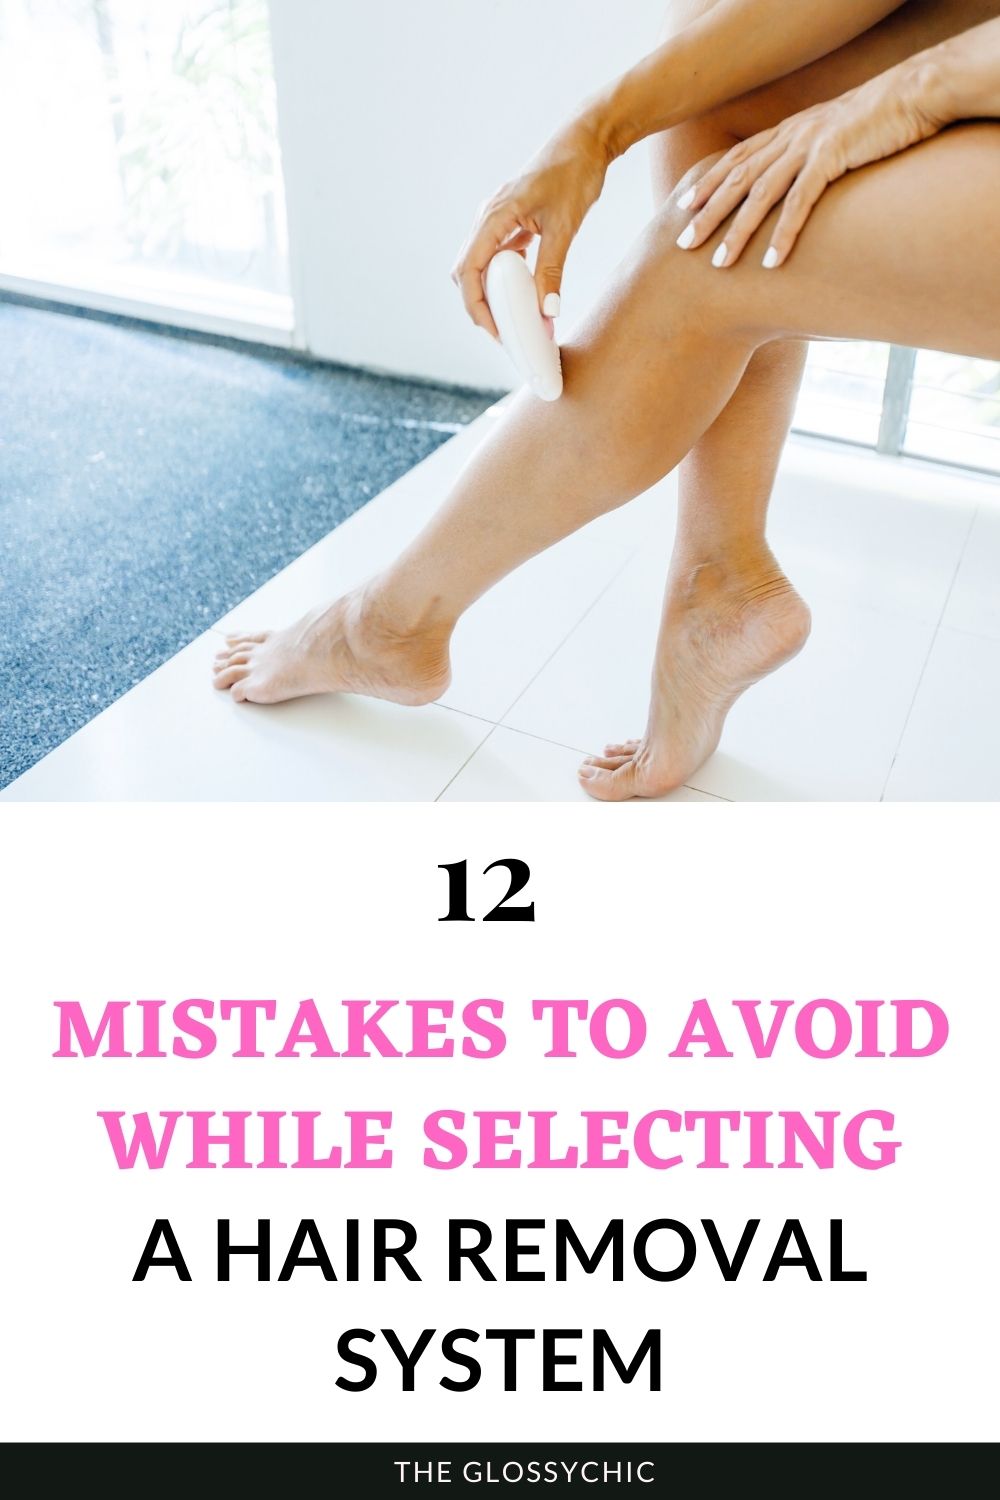 12 Mistakes To Avoid While Selecting A Hair Removal System